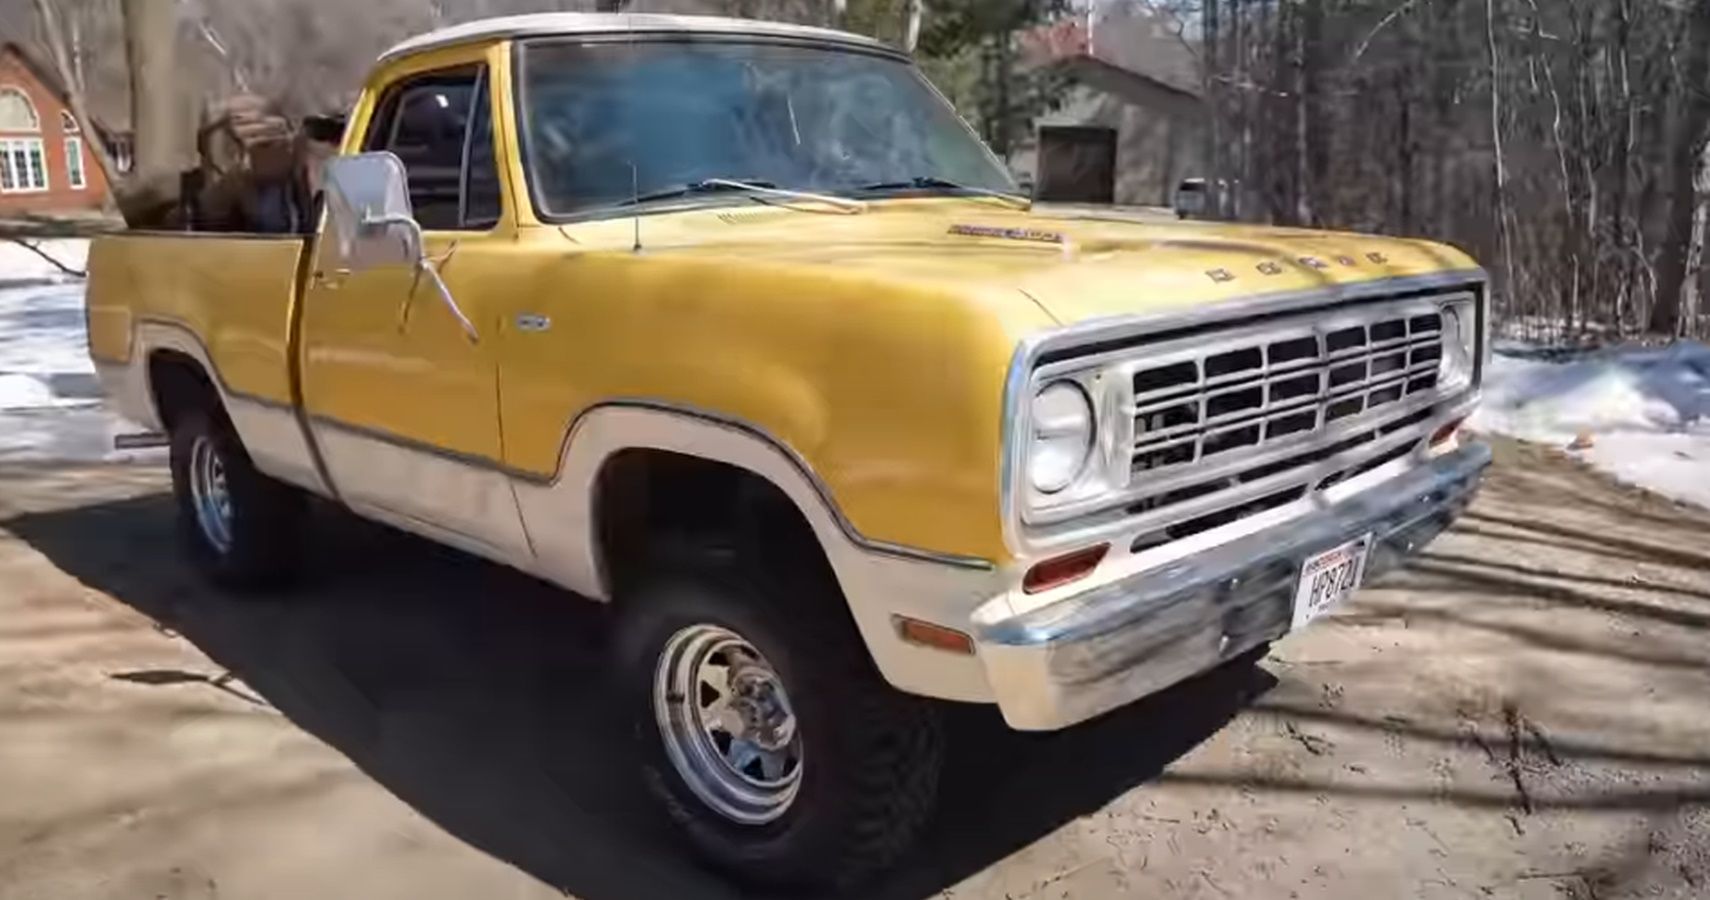 An Ultra Rare Dodge D Power Wagon Pickup Is The Star In Dennis Collins Latest Classic Car Rescue